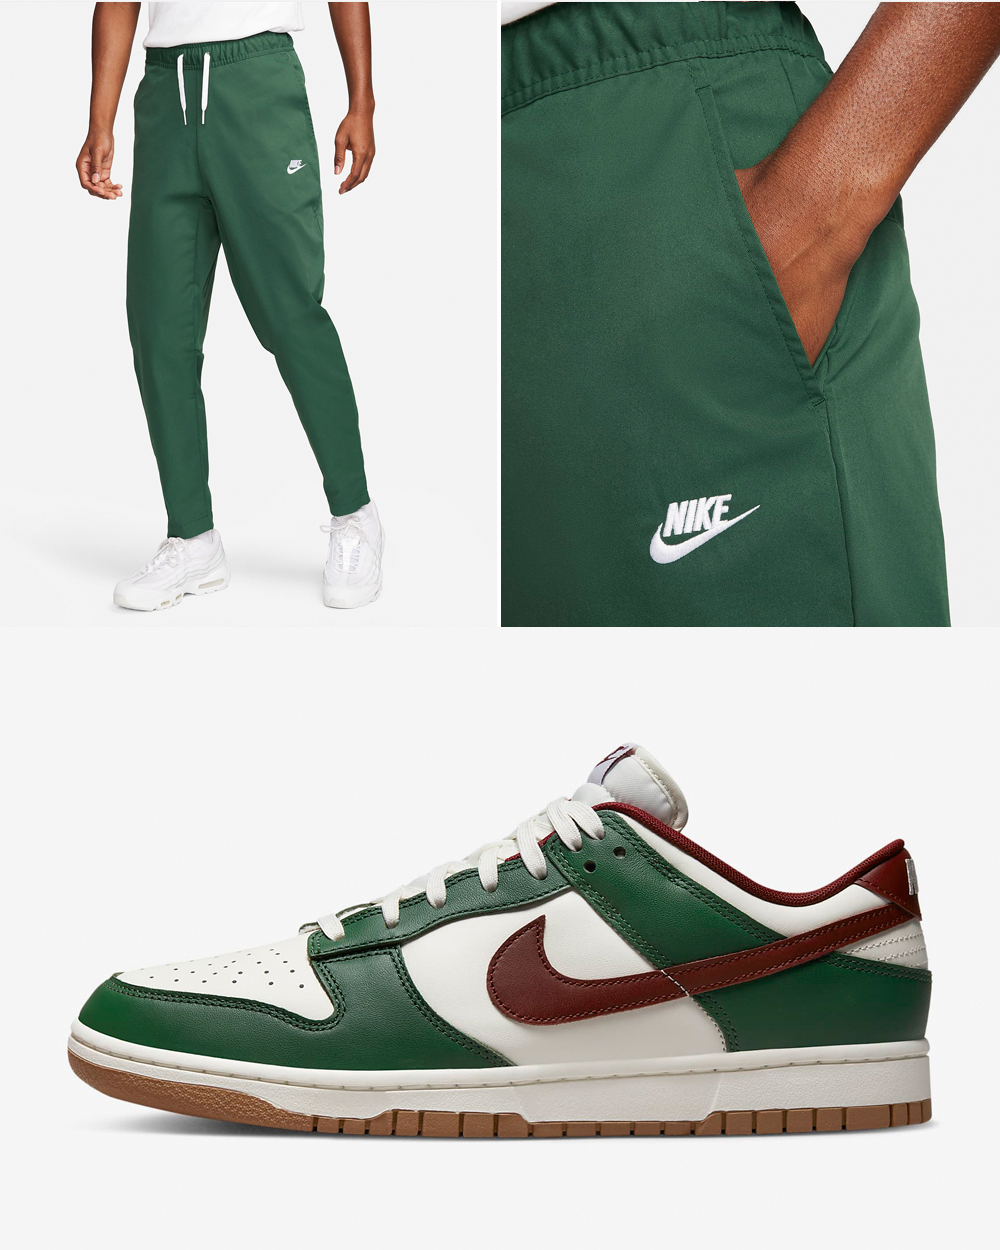 nike Tan Dunk Low Gorge Green Pants Outfit